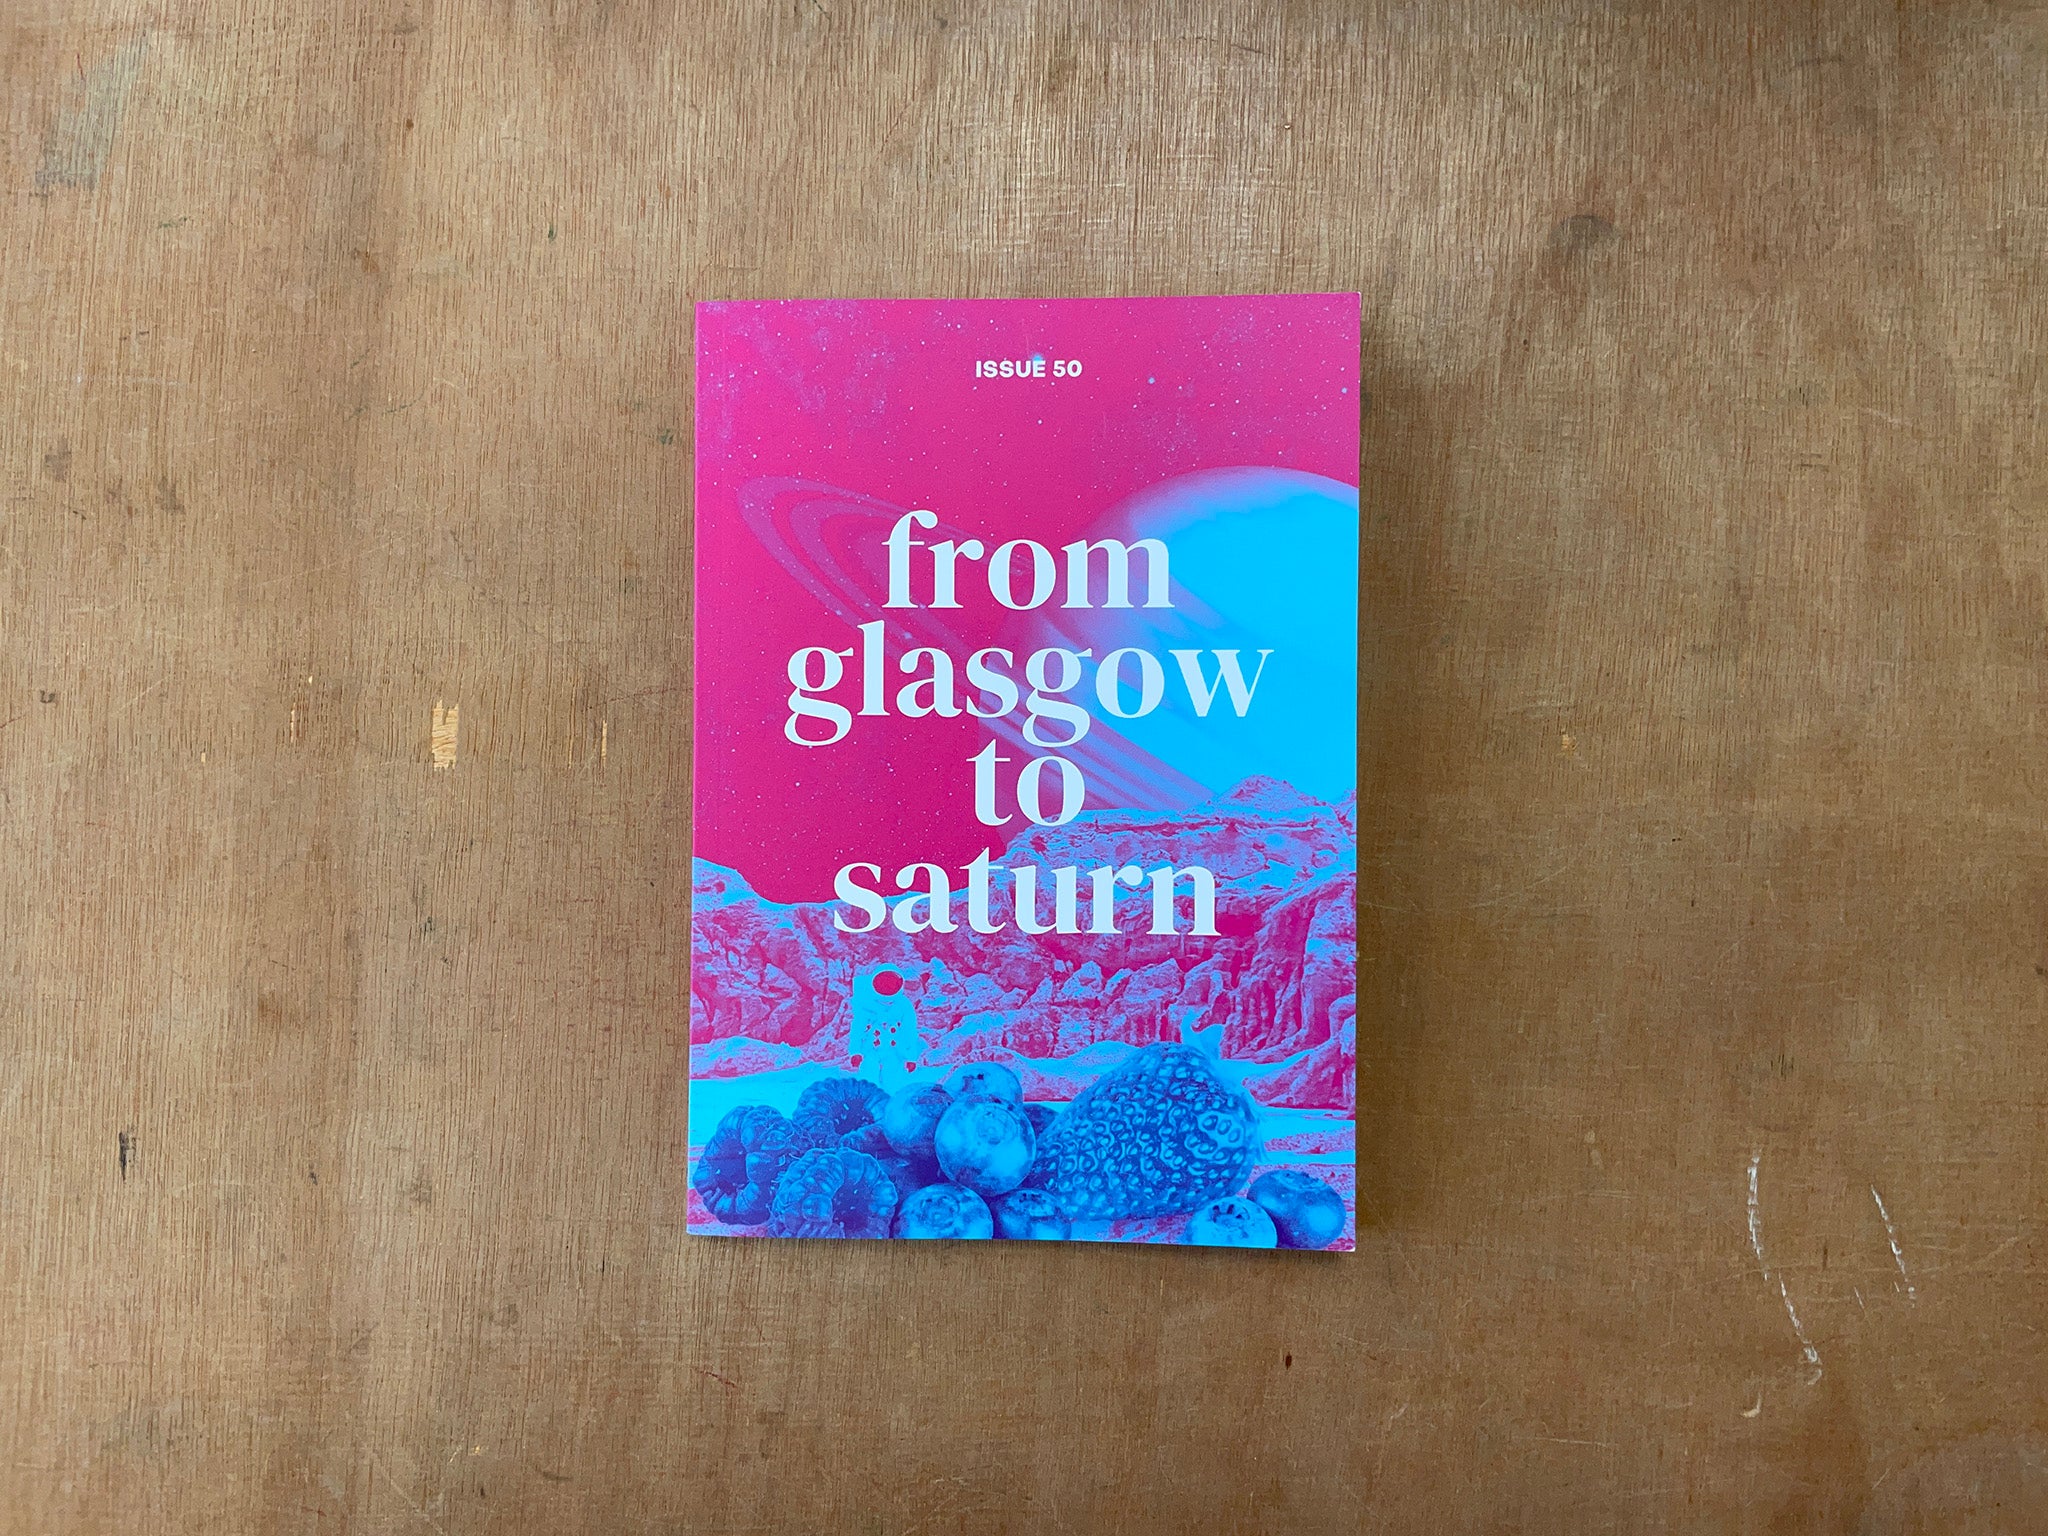 FROM GLASGOW TO SATURN JOURNAL ISSUE 50